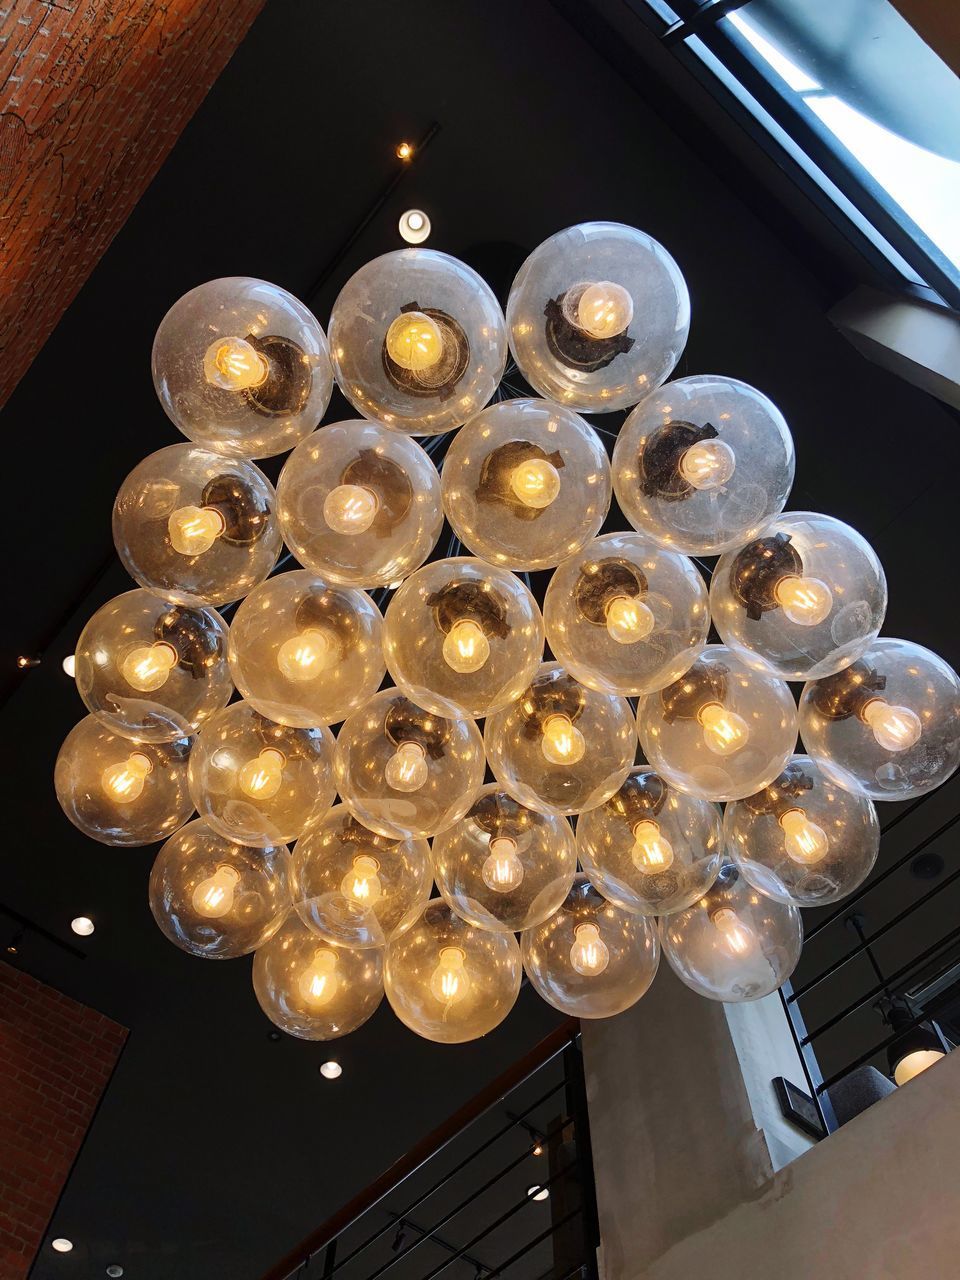 LOW ANGLE VIEW OF ILLUMINATED PENDANT LIGHTS HANGING FROM CEILING